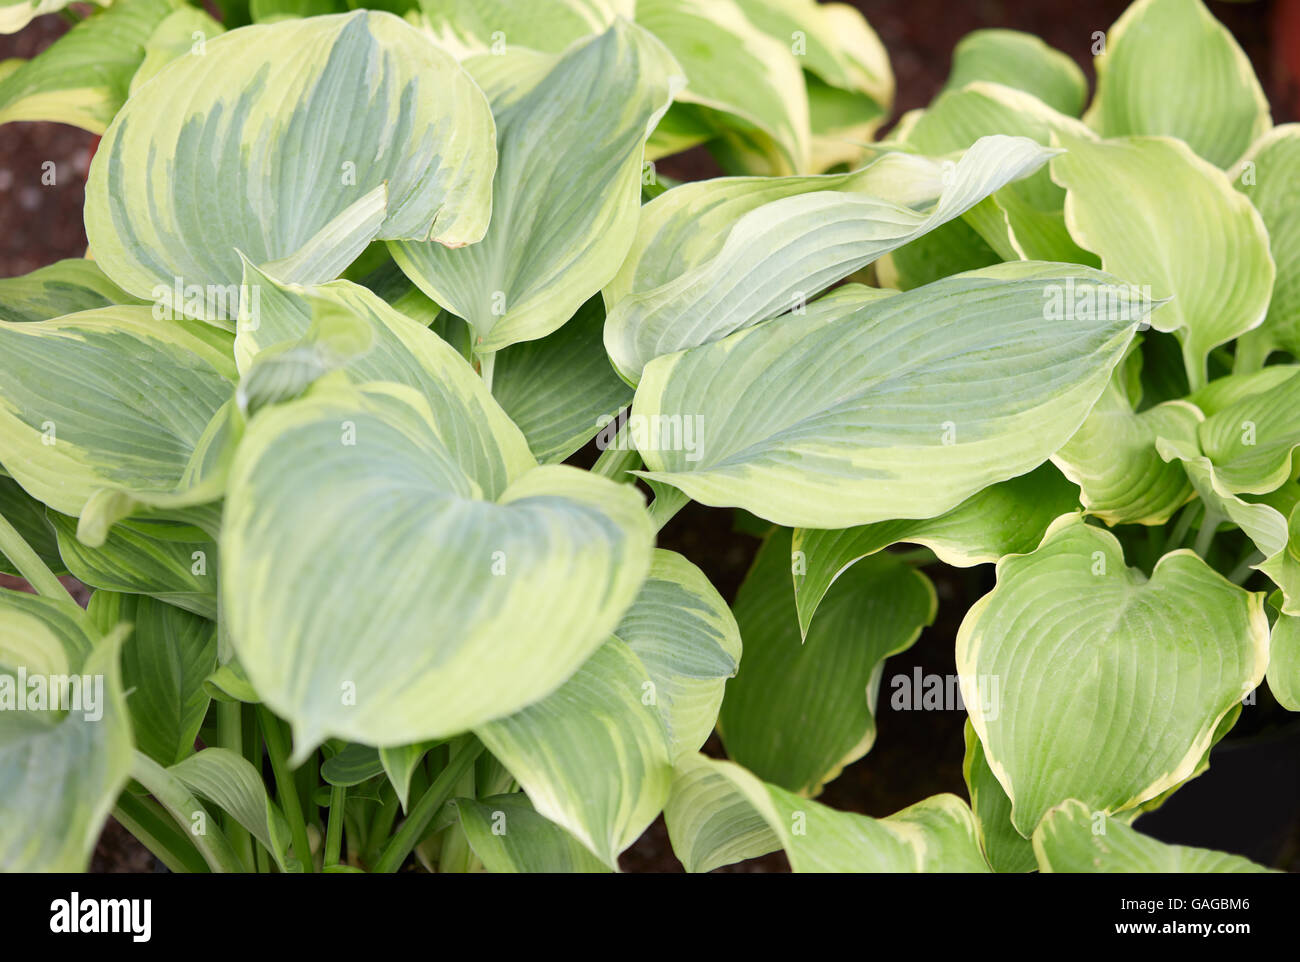 Hosta or plantain lilies leaves background Stock Photo